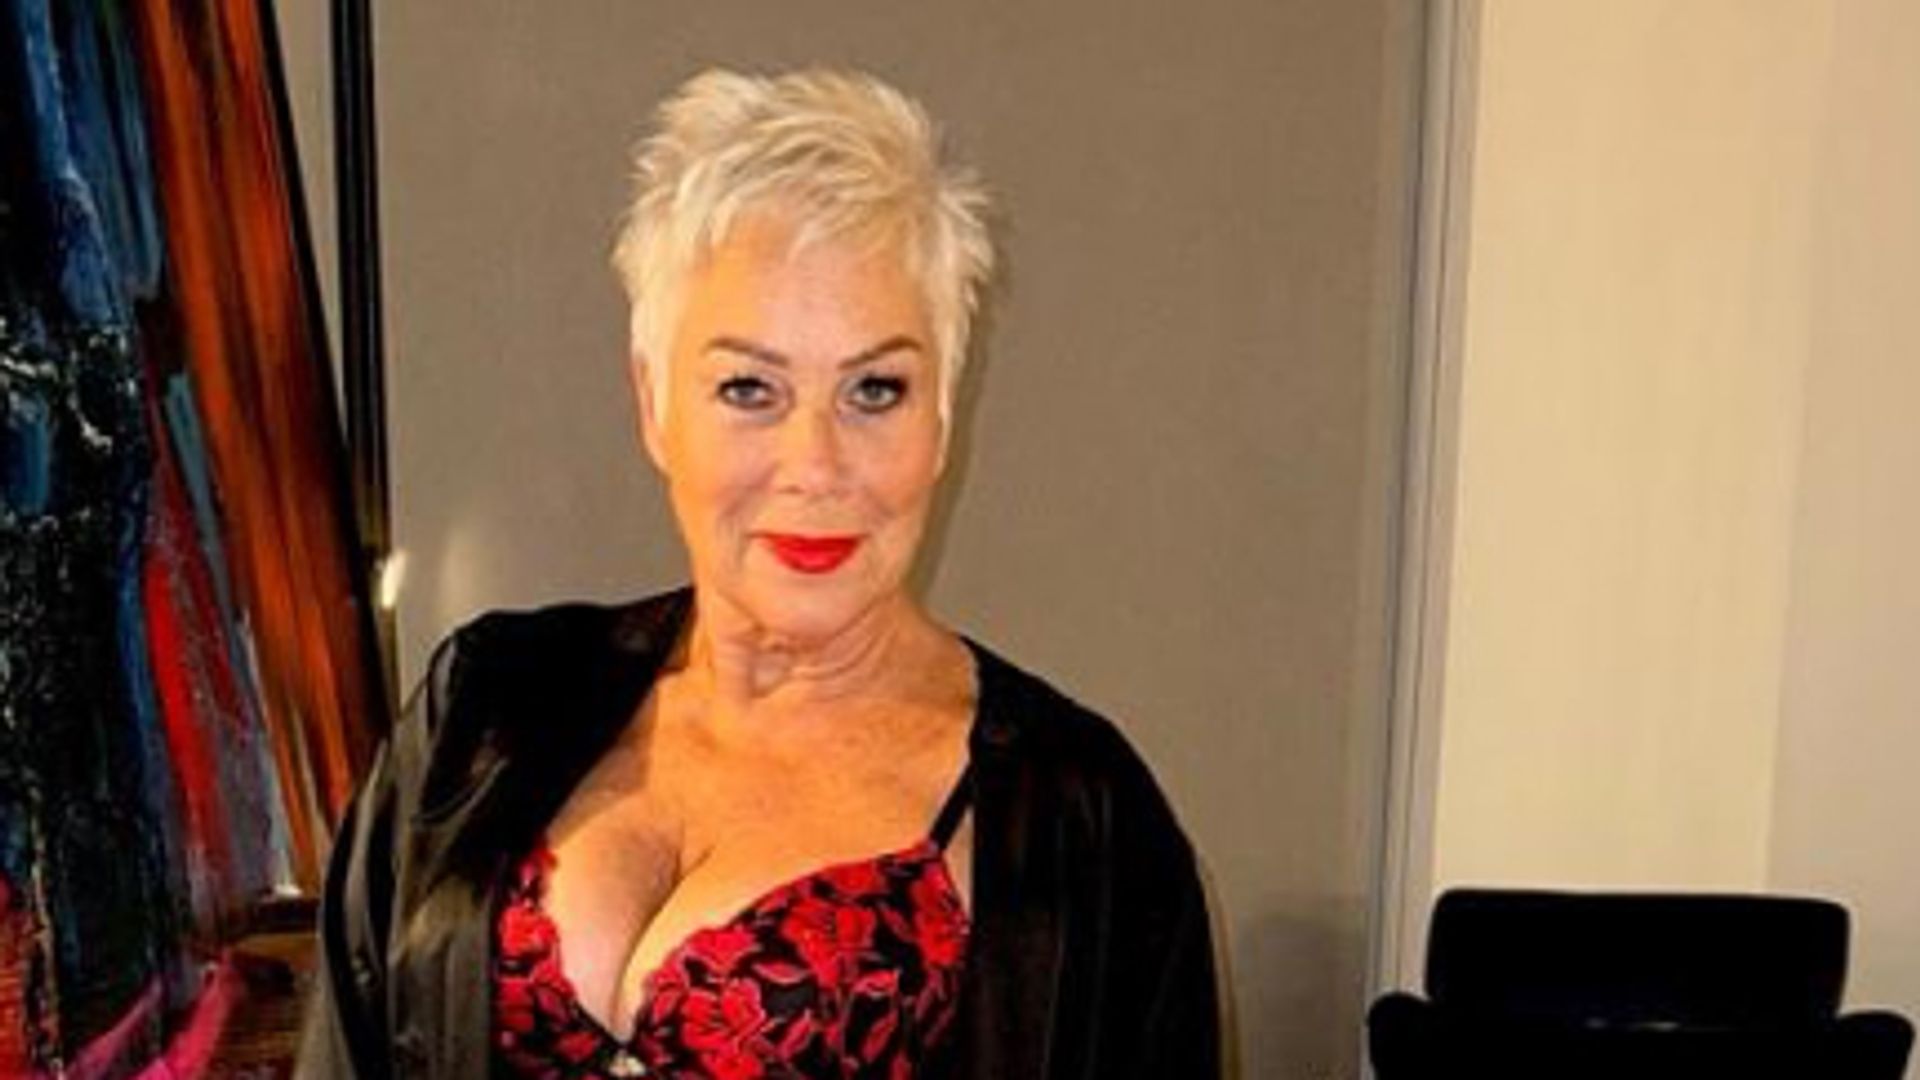 Denise Welch in a floral corset, negligee and pair of tights